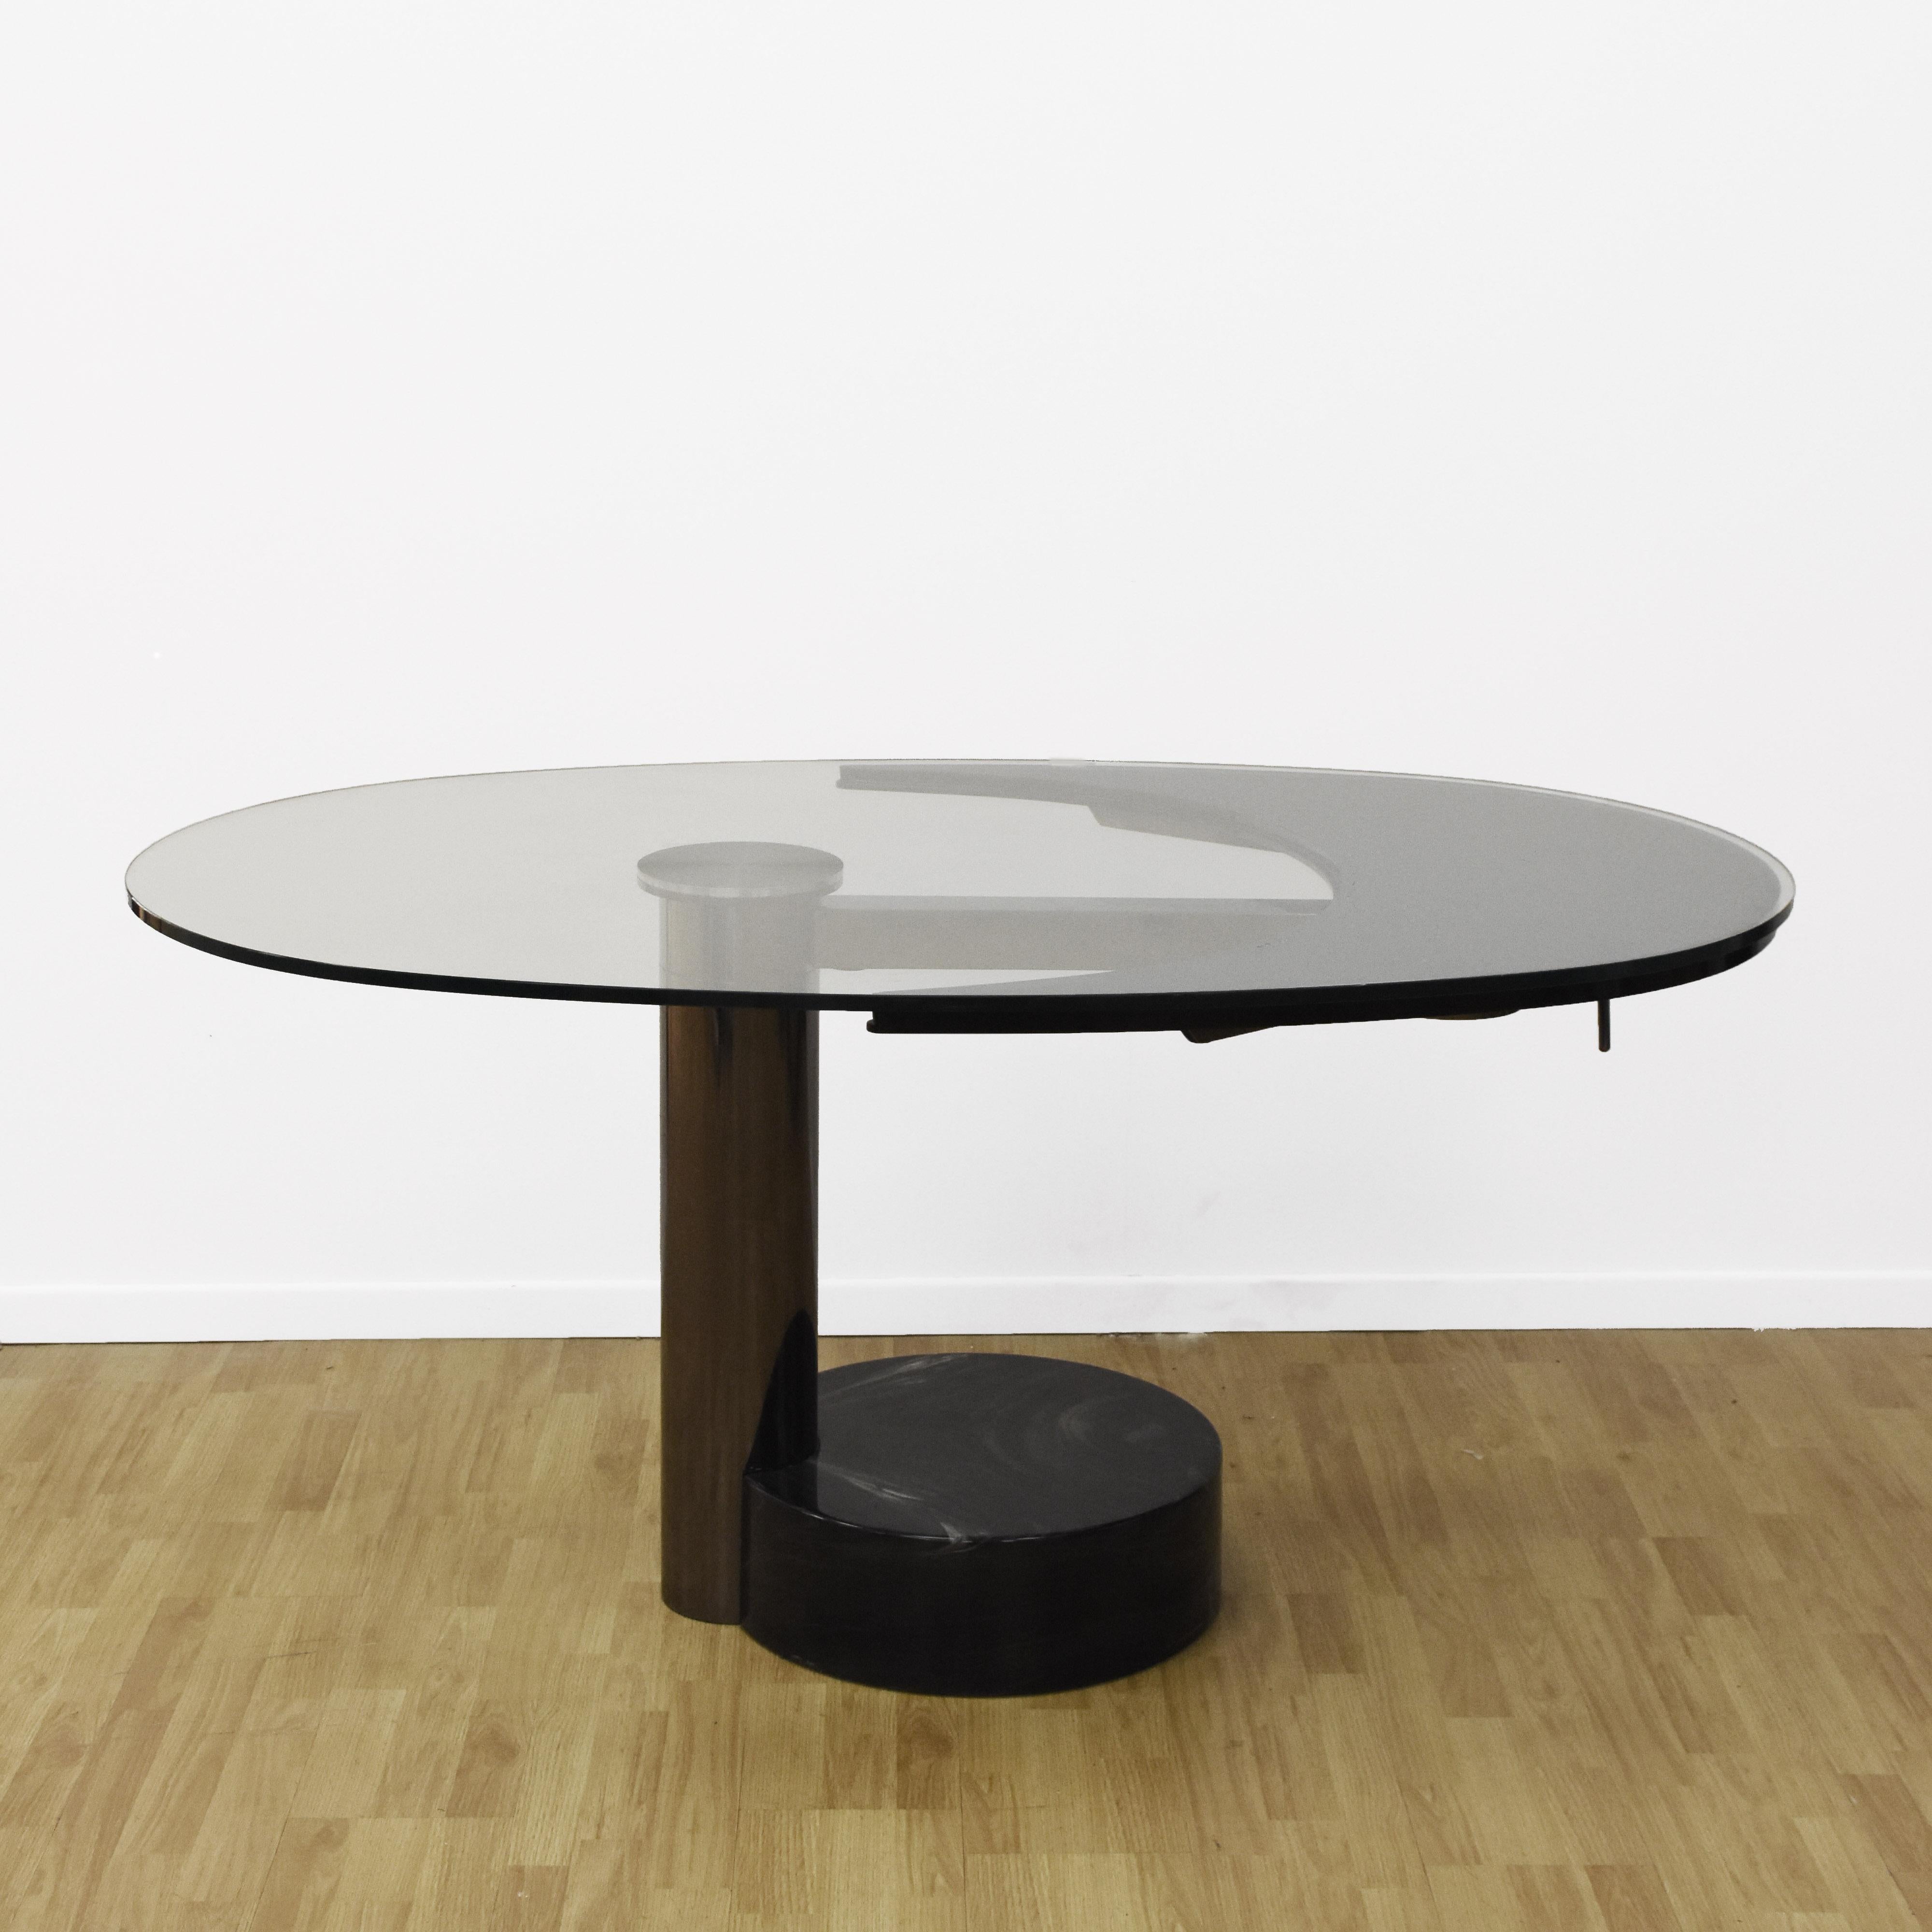 Mid-Century Modern Midcentury Steel and Glass Oval Revolving Dining Table after Pierre Cardin 1960s